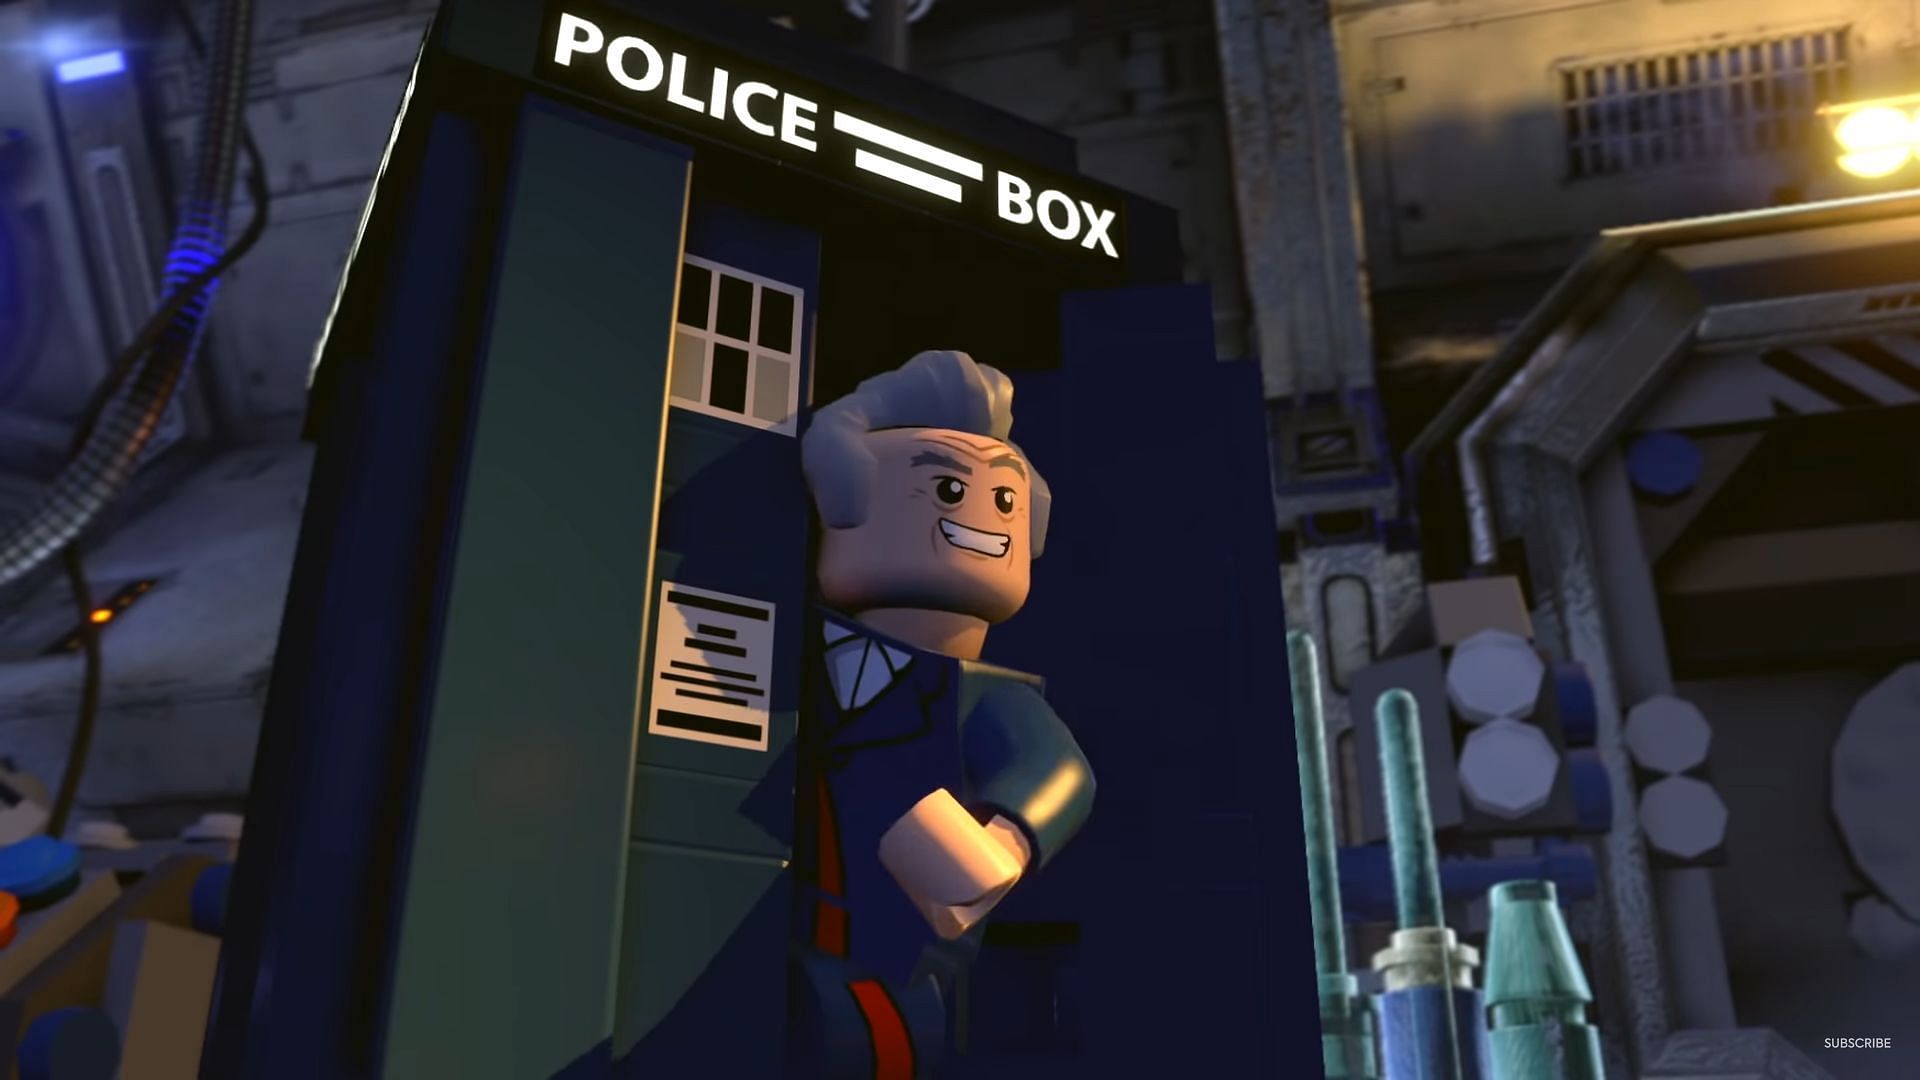 Doctor Who may be returning to the LEGO format if the rumors are true (Screenshot from LEGO Dimensions)